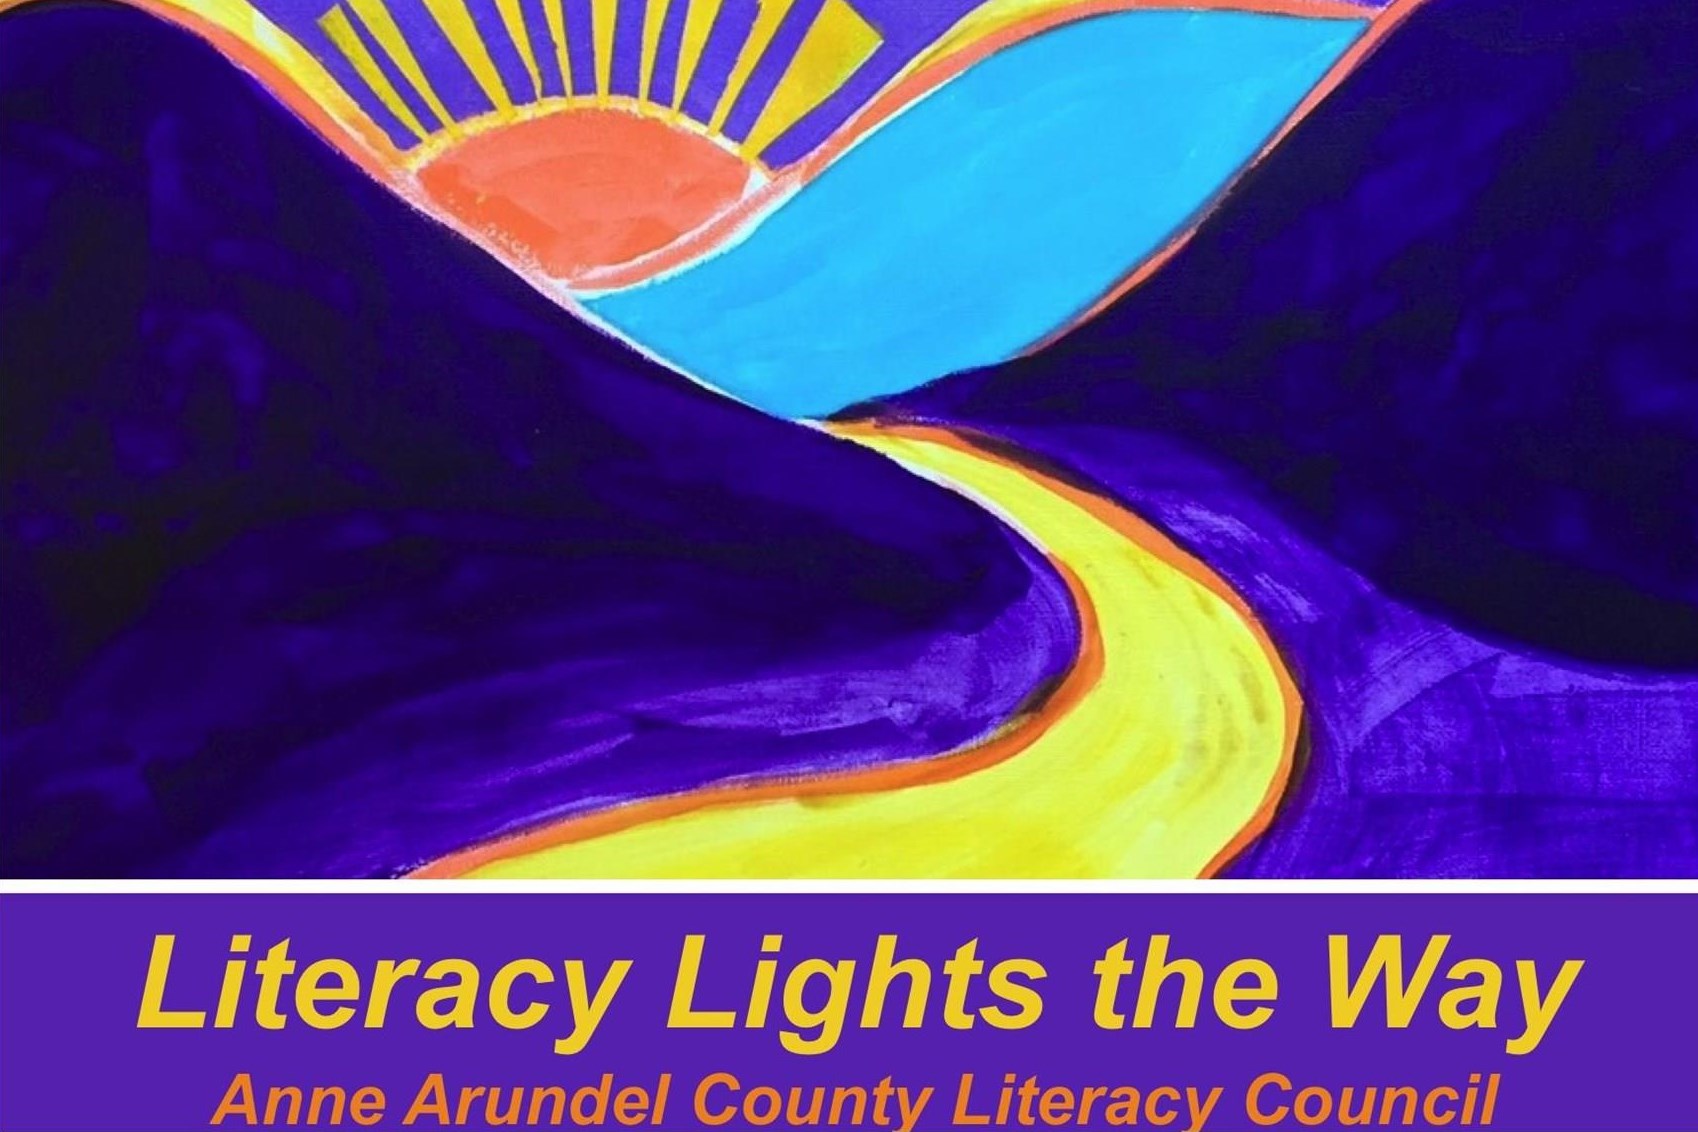 anne-arundel-county-literacy-council-3rd-annual-fundraiser-and-walk-a-thon